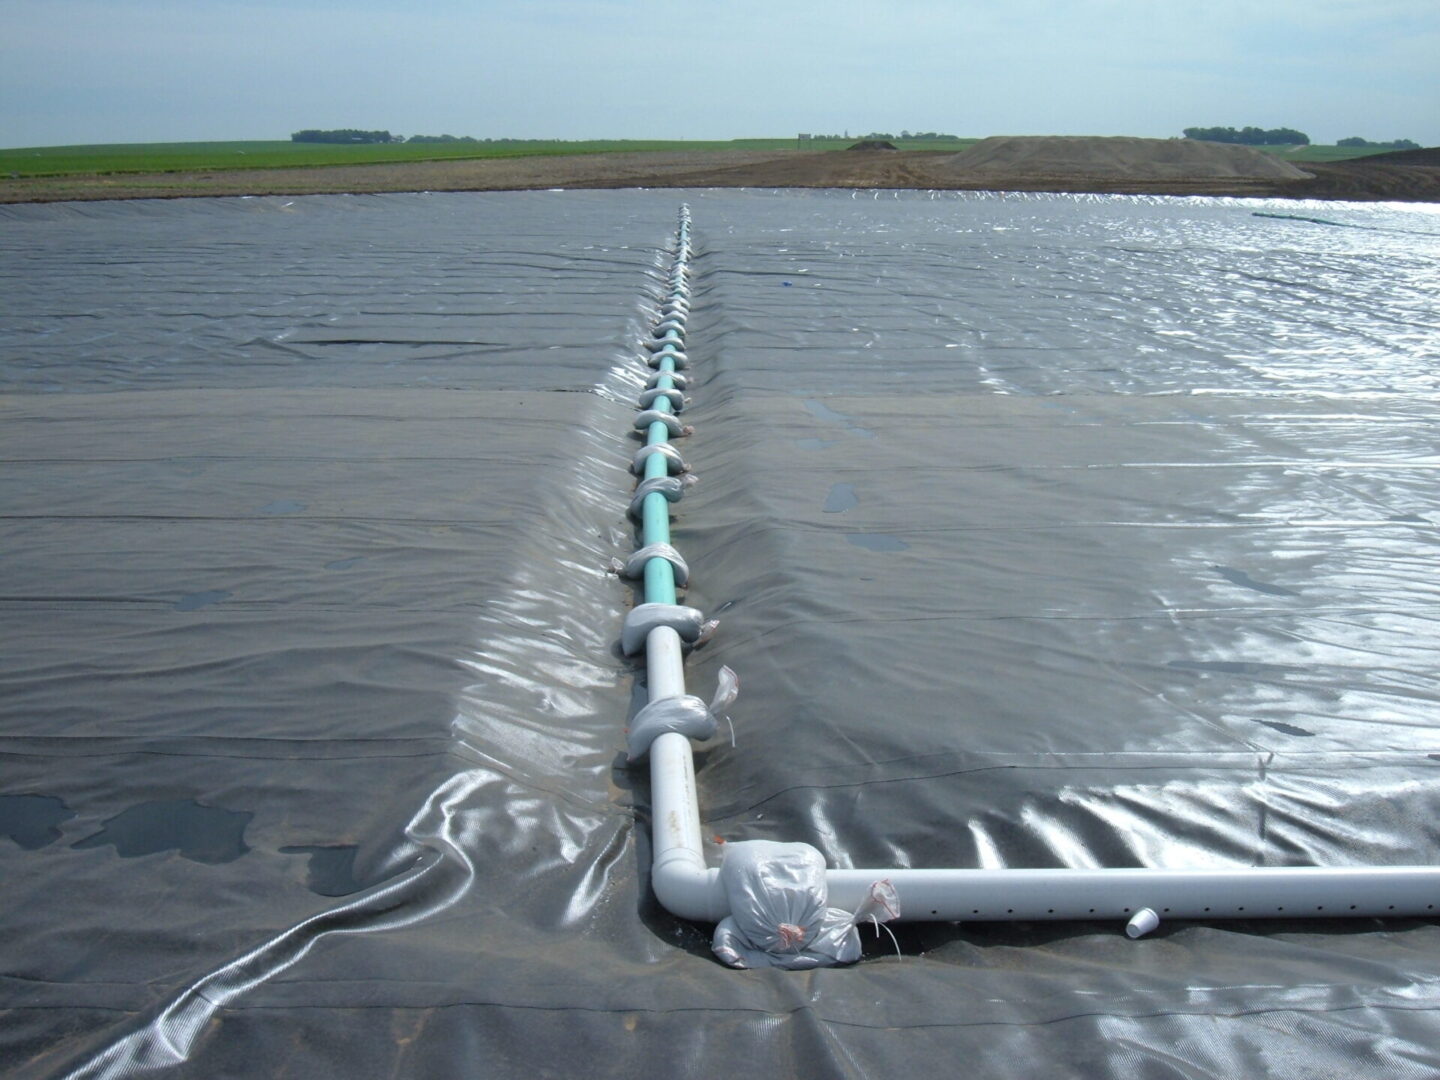 A pipe is connected to the water surface.